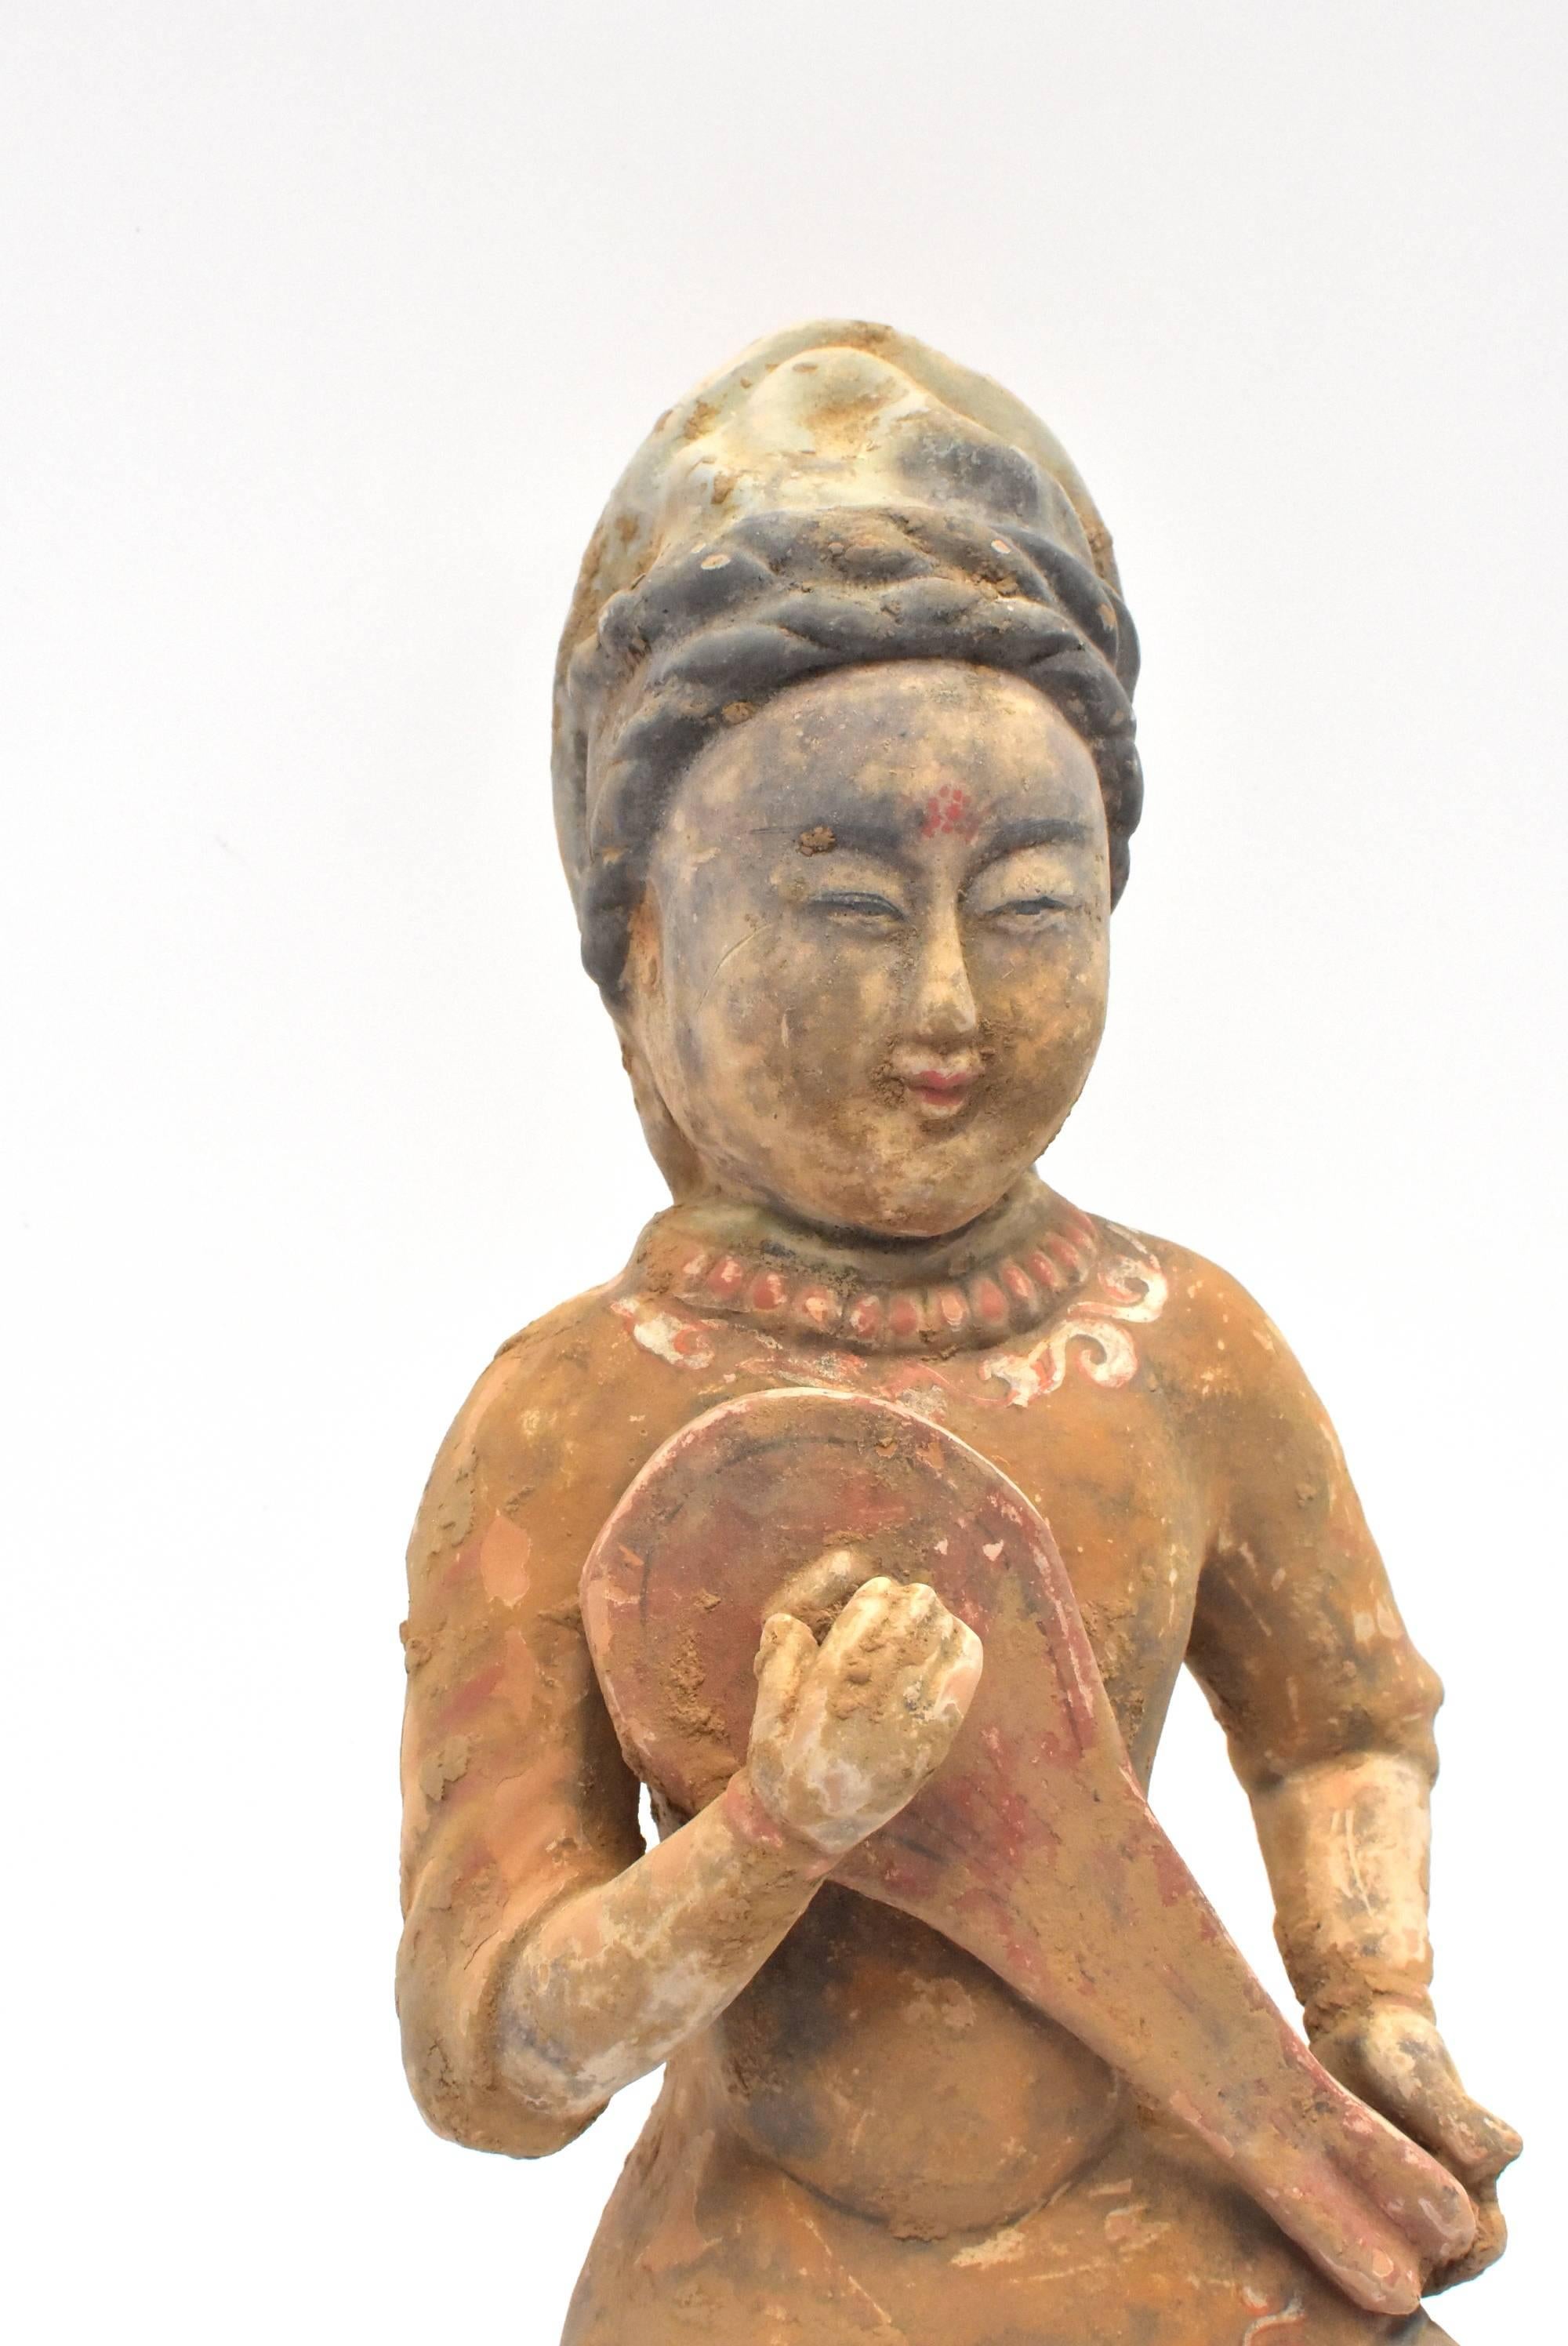 A fantastic Tang style terracotta figure. Such a figure is seen in the Han dynasty dating 206 BC-220 AD. The figure is of a central Asian musician. Her headdress and facial features indicate she is from north western region, likely central Asia. She